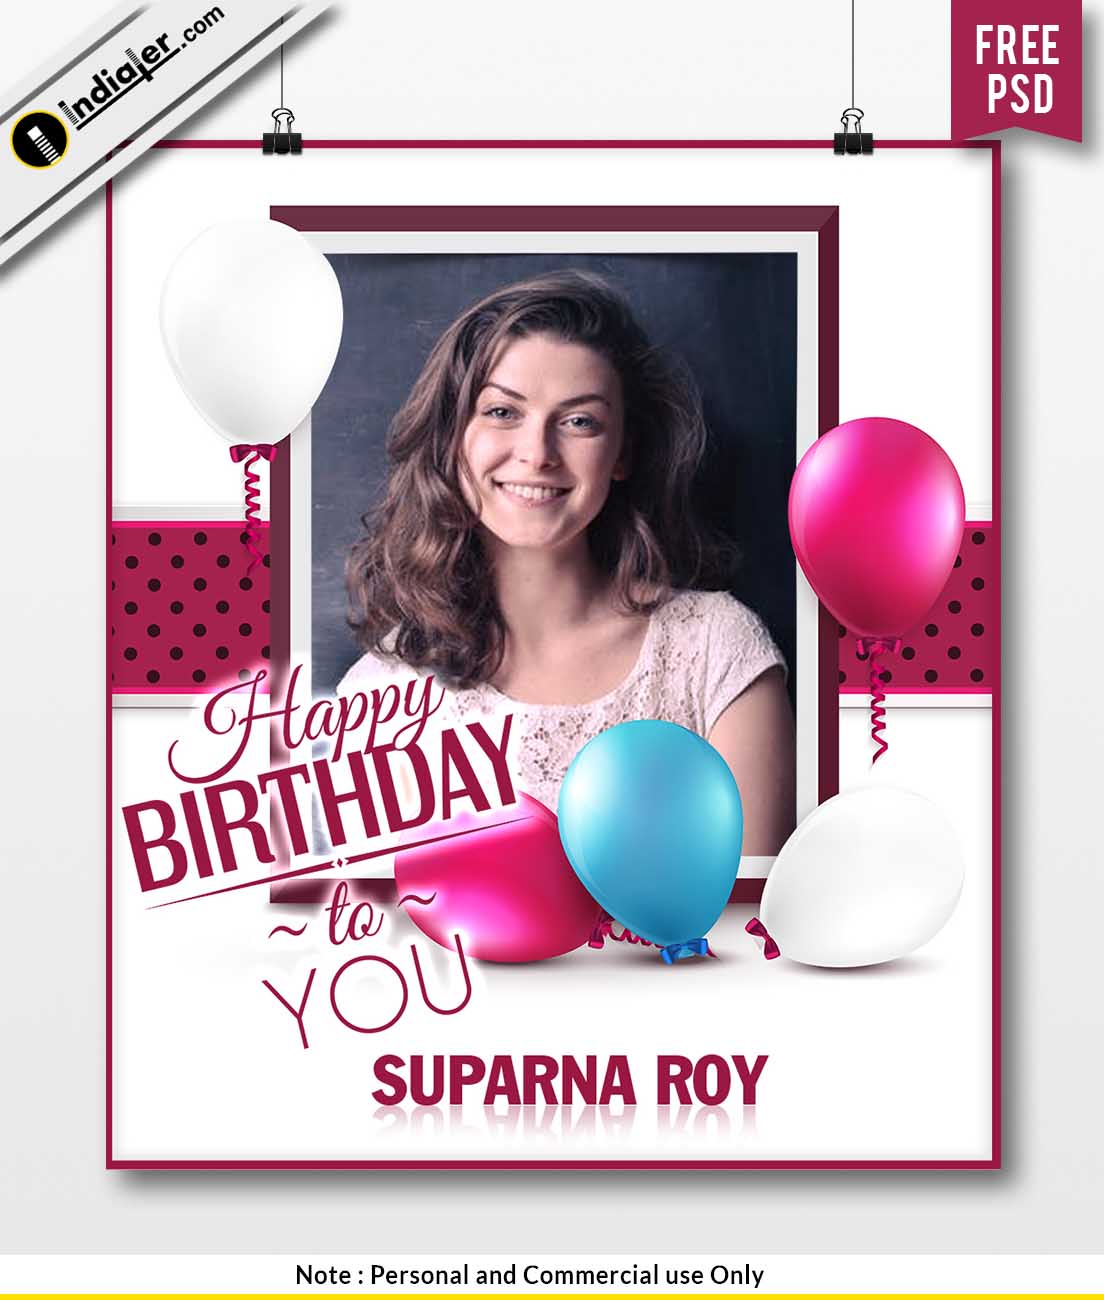 Free Birthday Wishes Photo Frame and Balloon PSD template